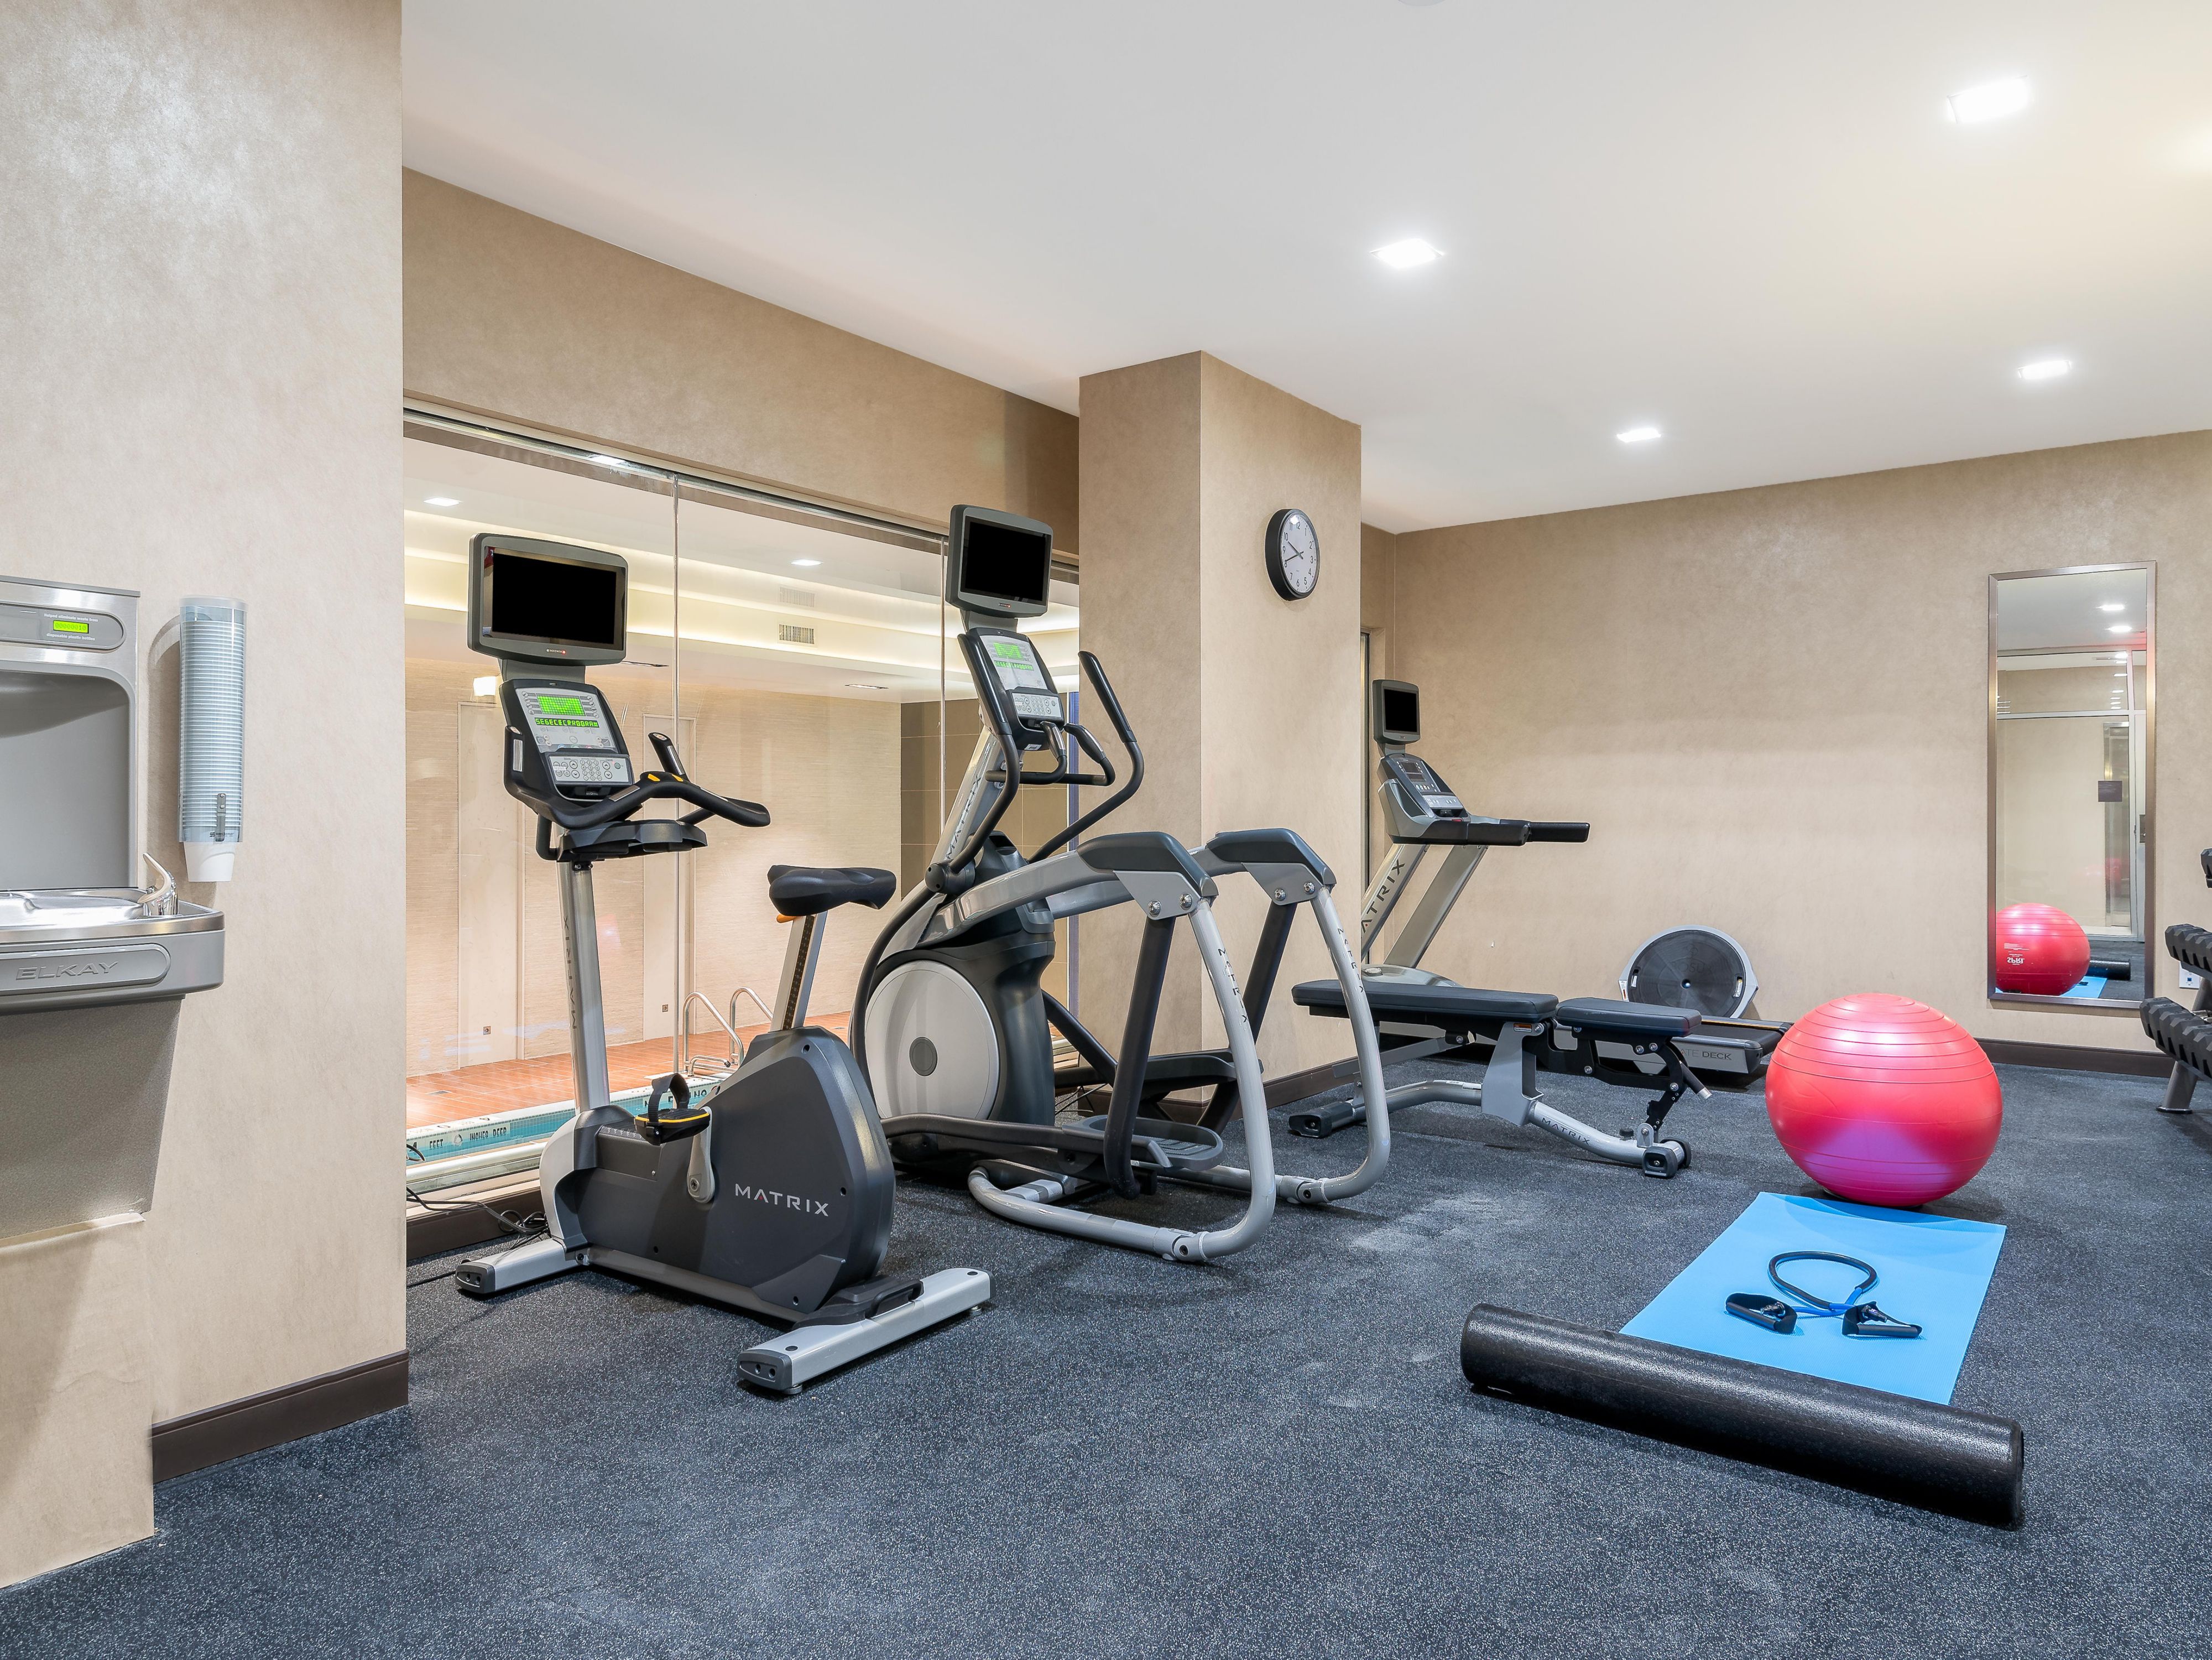 Workout at our Fitness Center to stay on track with your fitness goals! Our equipment includes treadmill, elliptical machines, free weights, and stationary bicycle. 